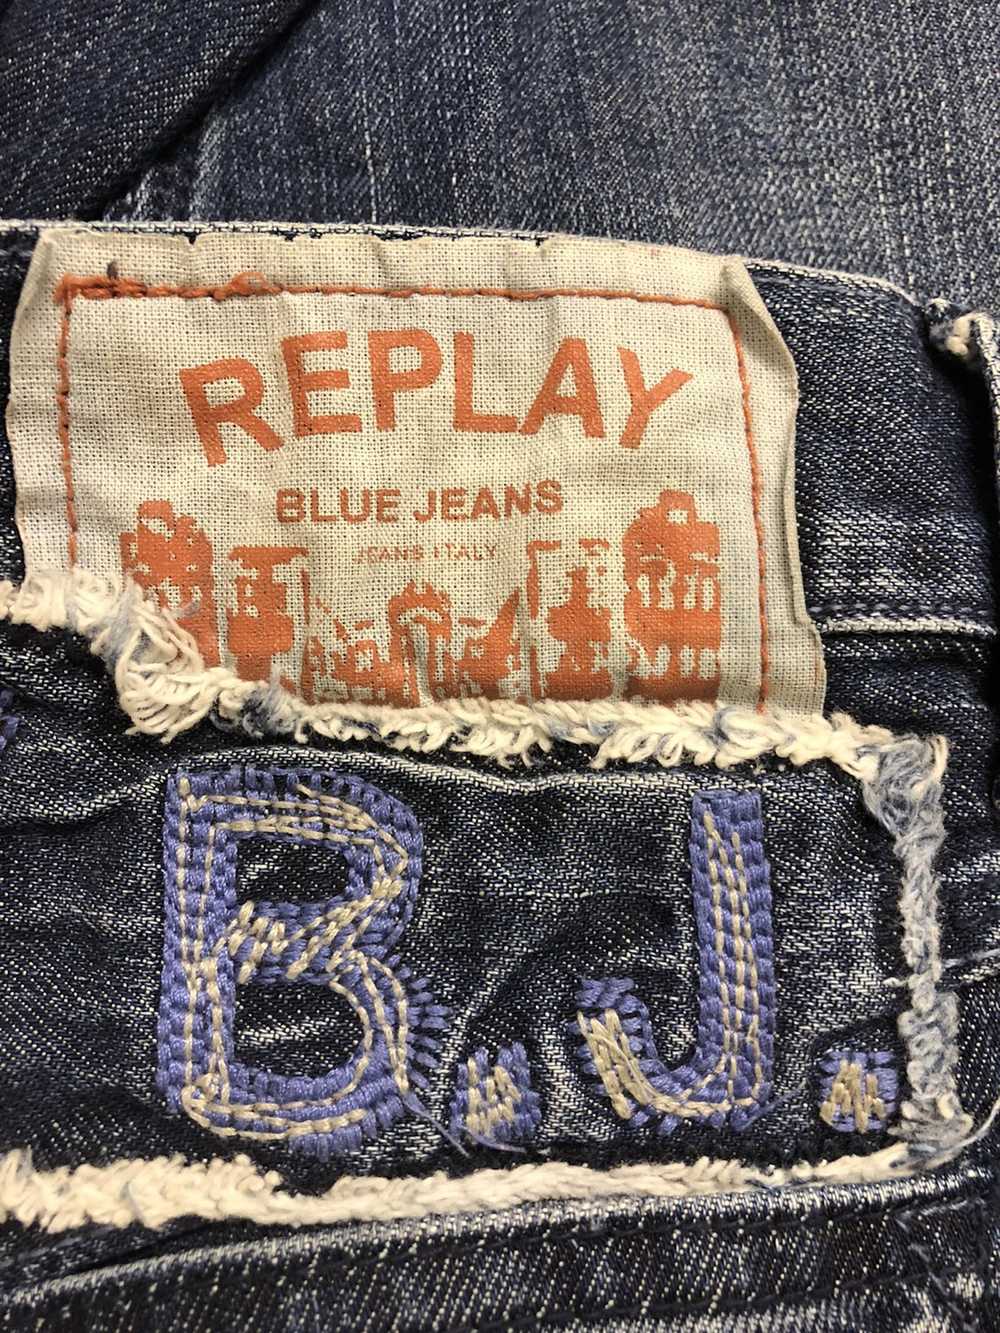 Replay × Vintage REPLAY BLUE JEANS ITALY RARE VIN… - image 3